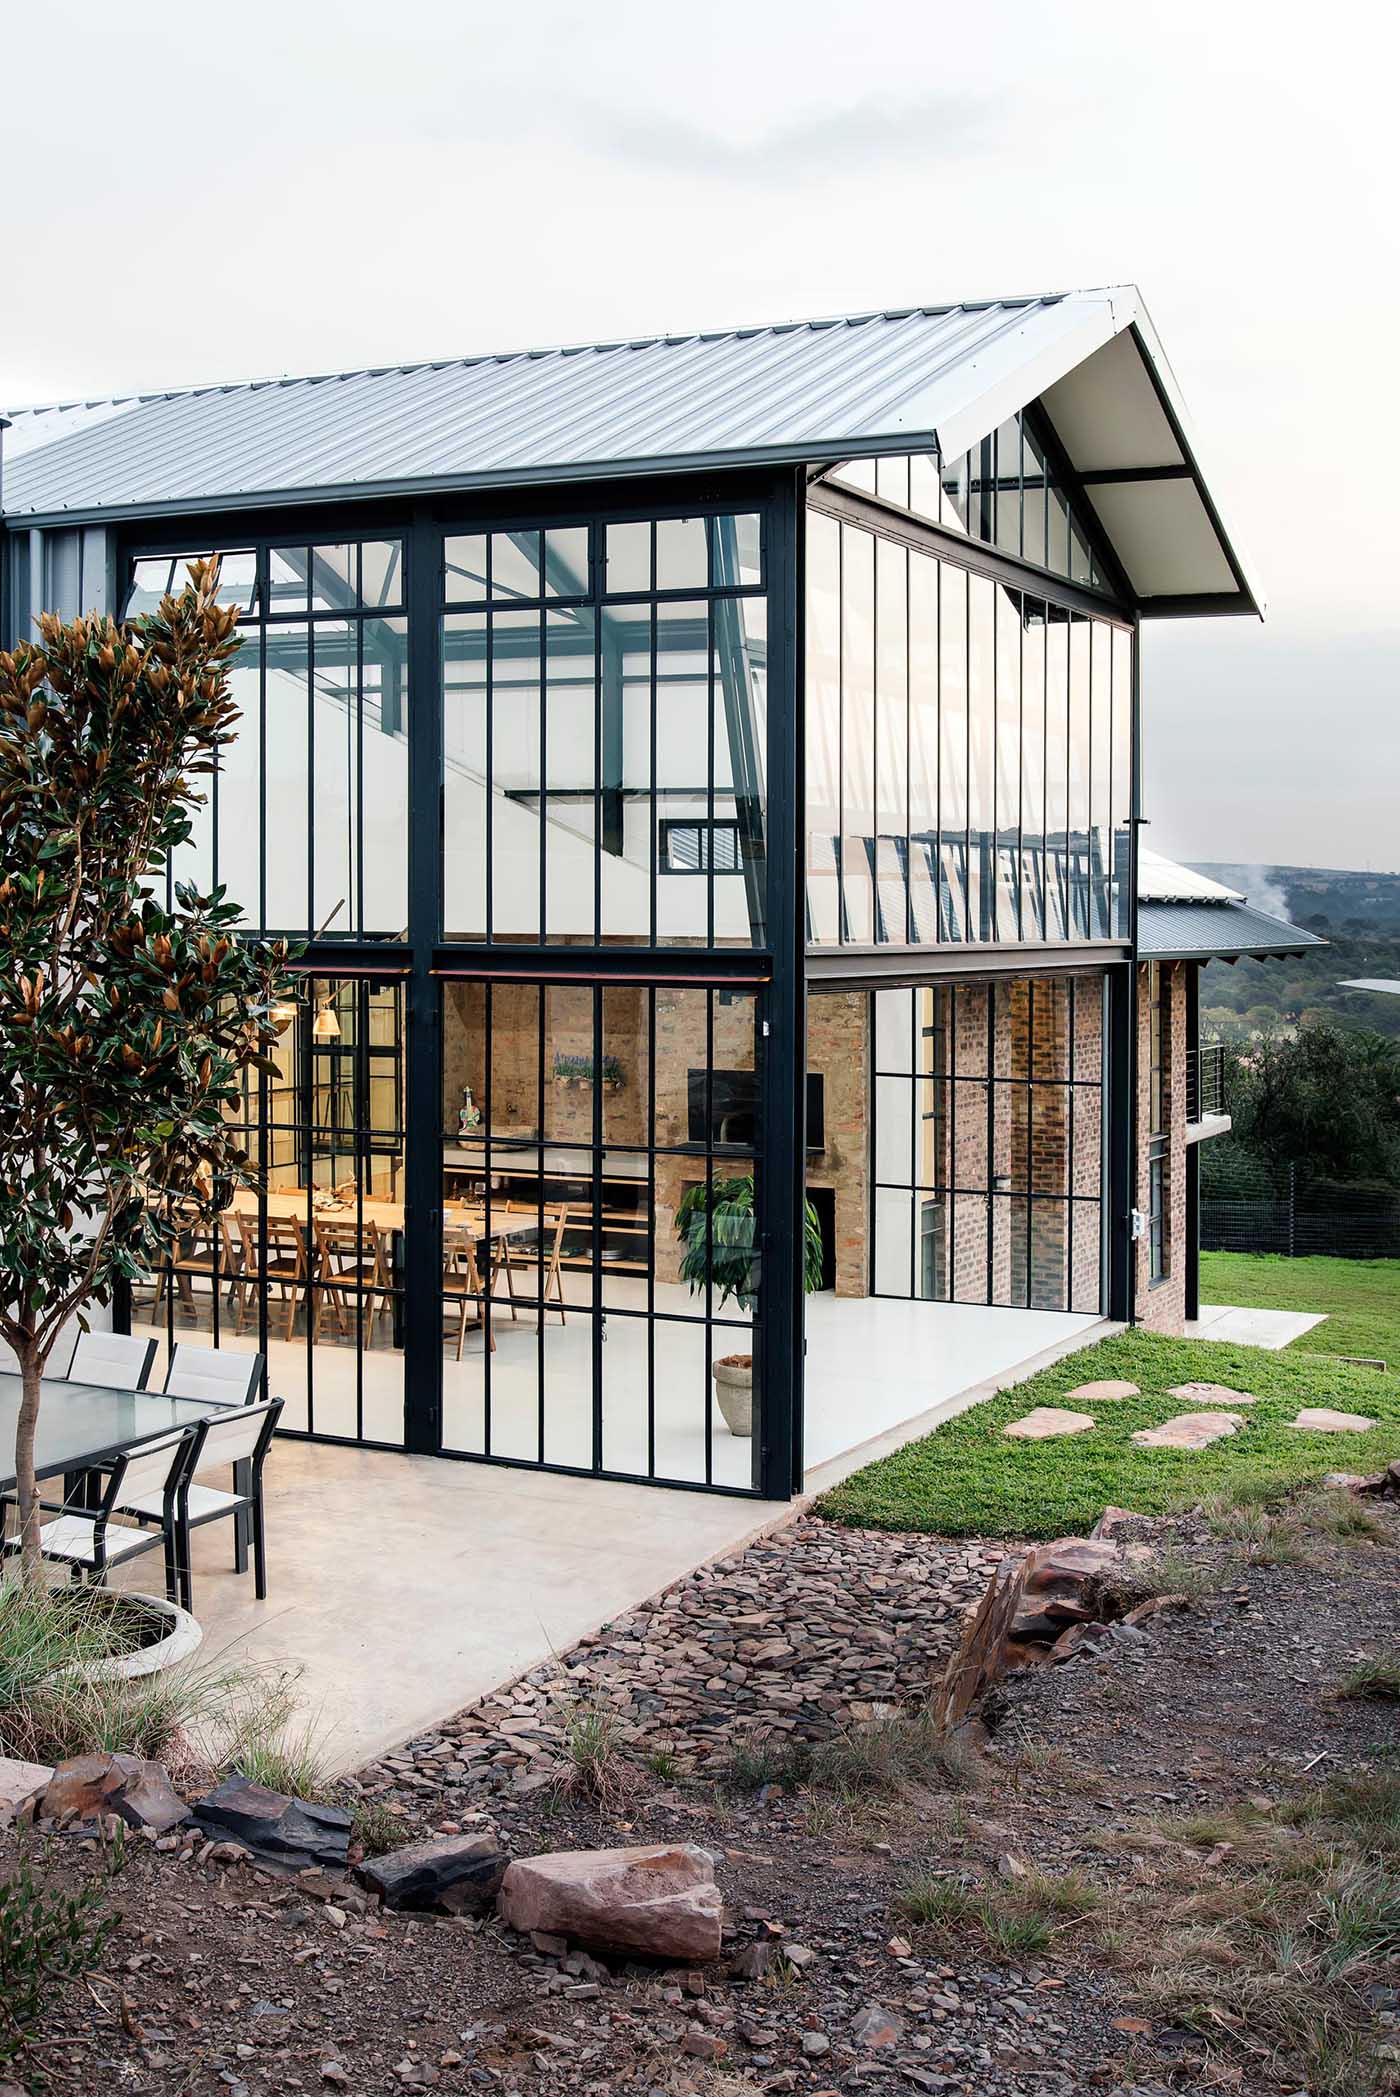 The double-height conservatory can be opened, providing uninterrupted views of the landscape, while a glass section flooring gives a glimpse of the lower level below.